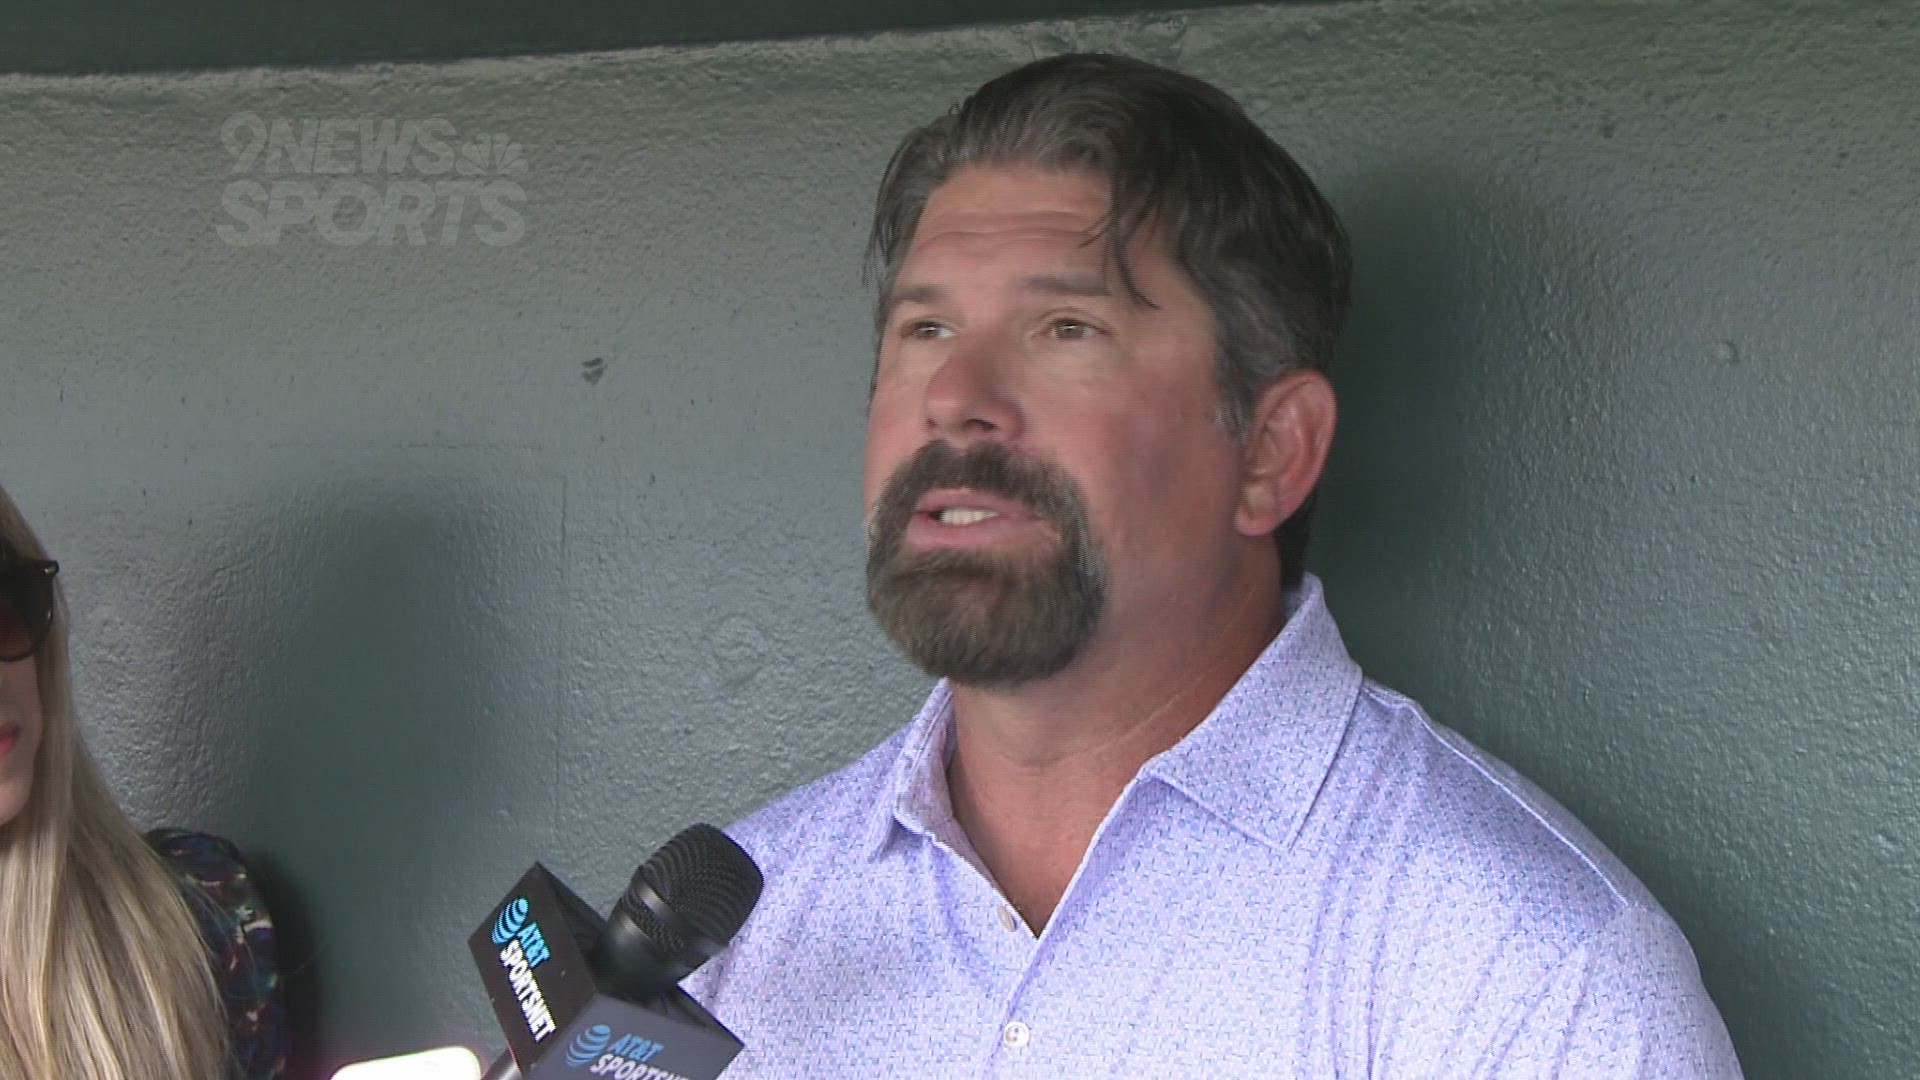 The Colorado Rockies will honor their former infielder with "Todd Helton Day" on Saturday, August 19.